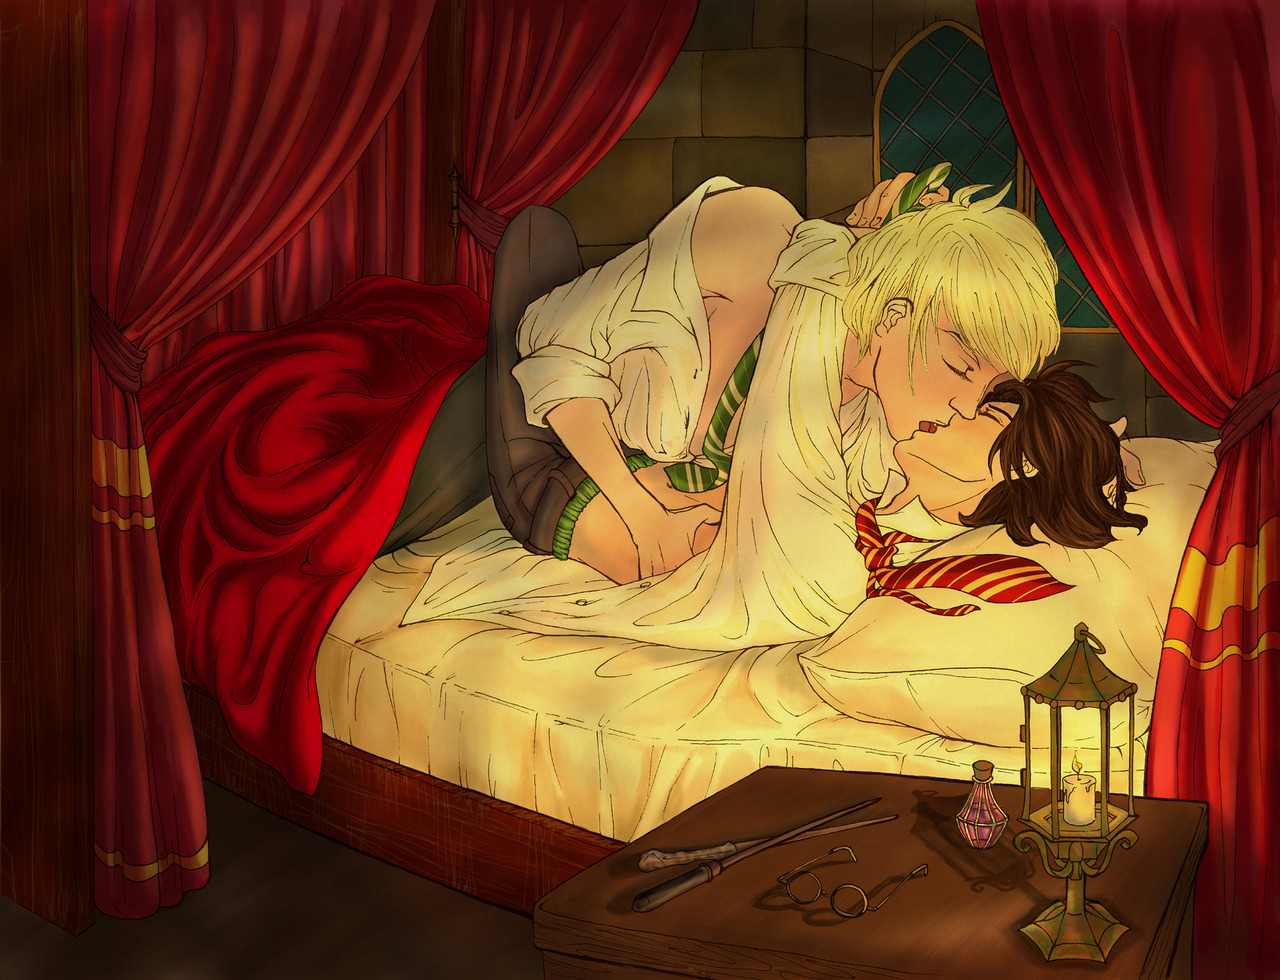 Harry and Draco Images on Fanpop.